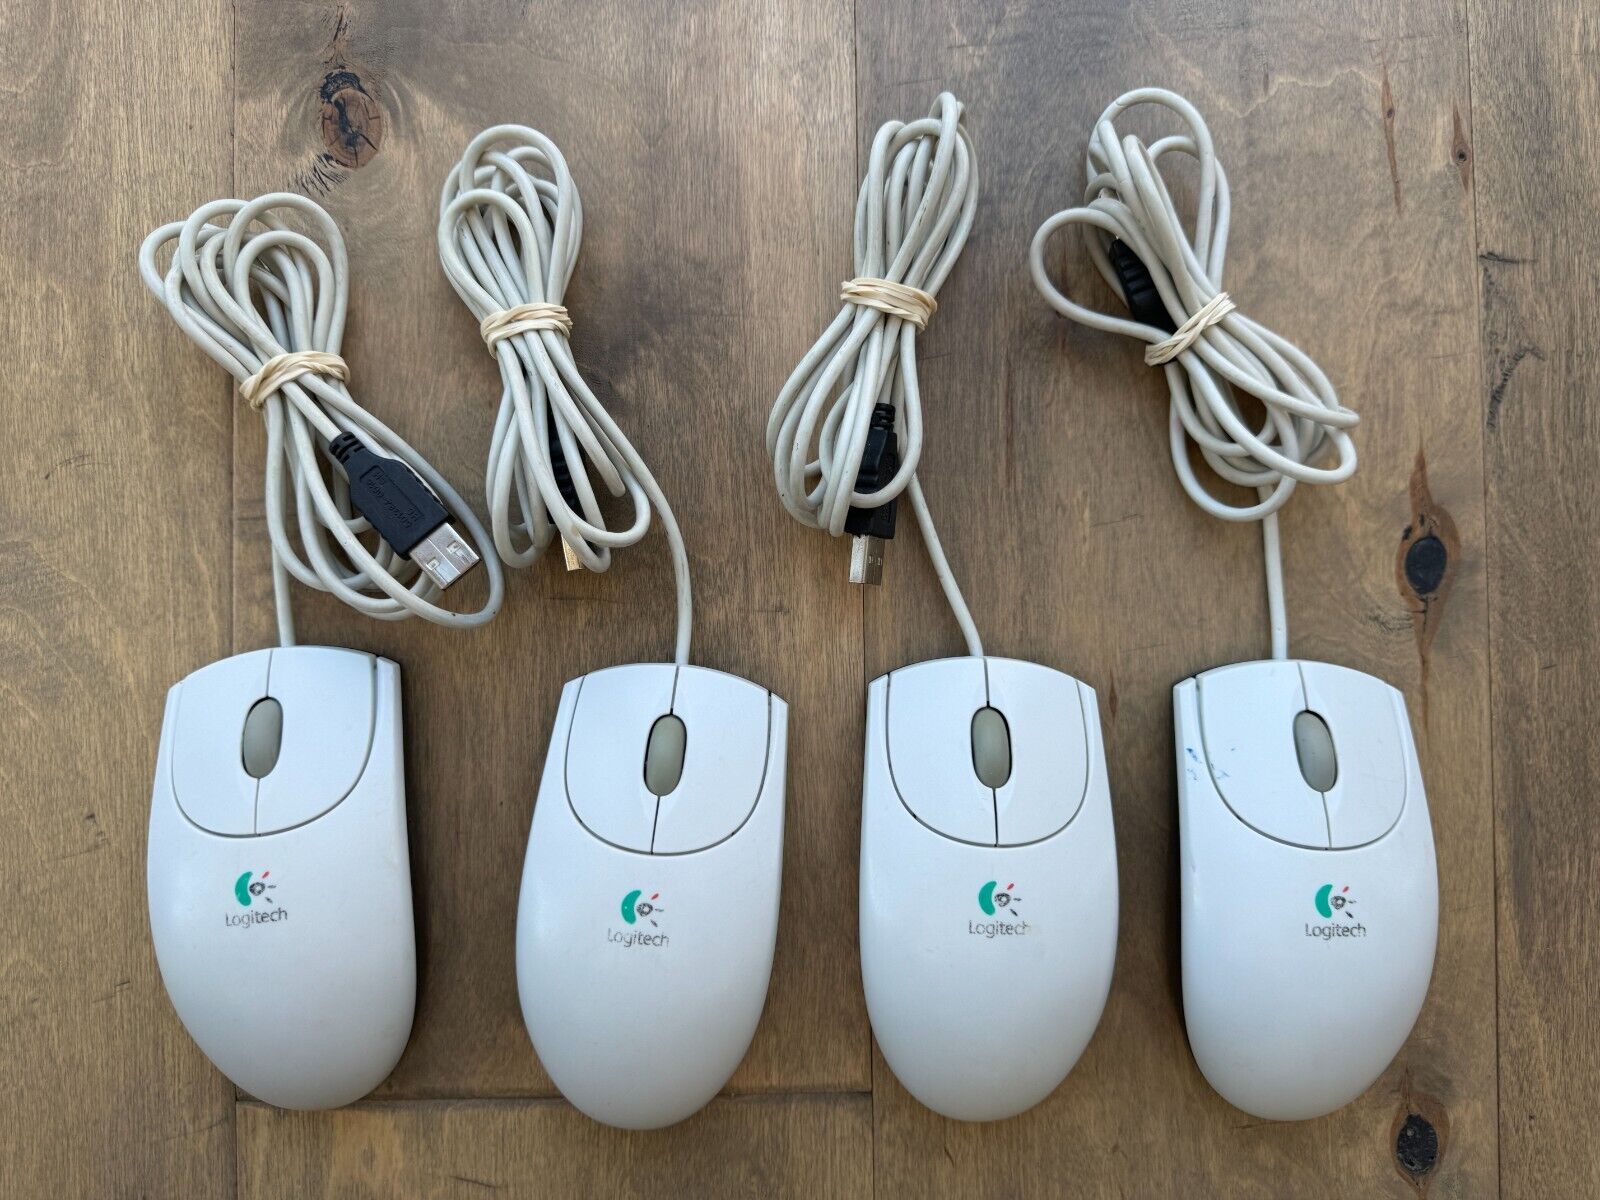 Lot of 4 - Vintage Logitech Corded USB Optical Mouse White Gray M-BJ58 TESTED